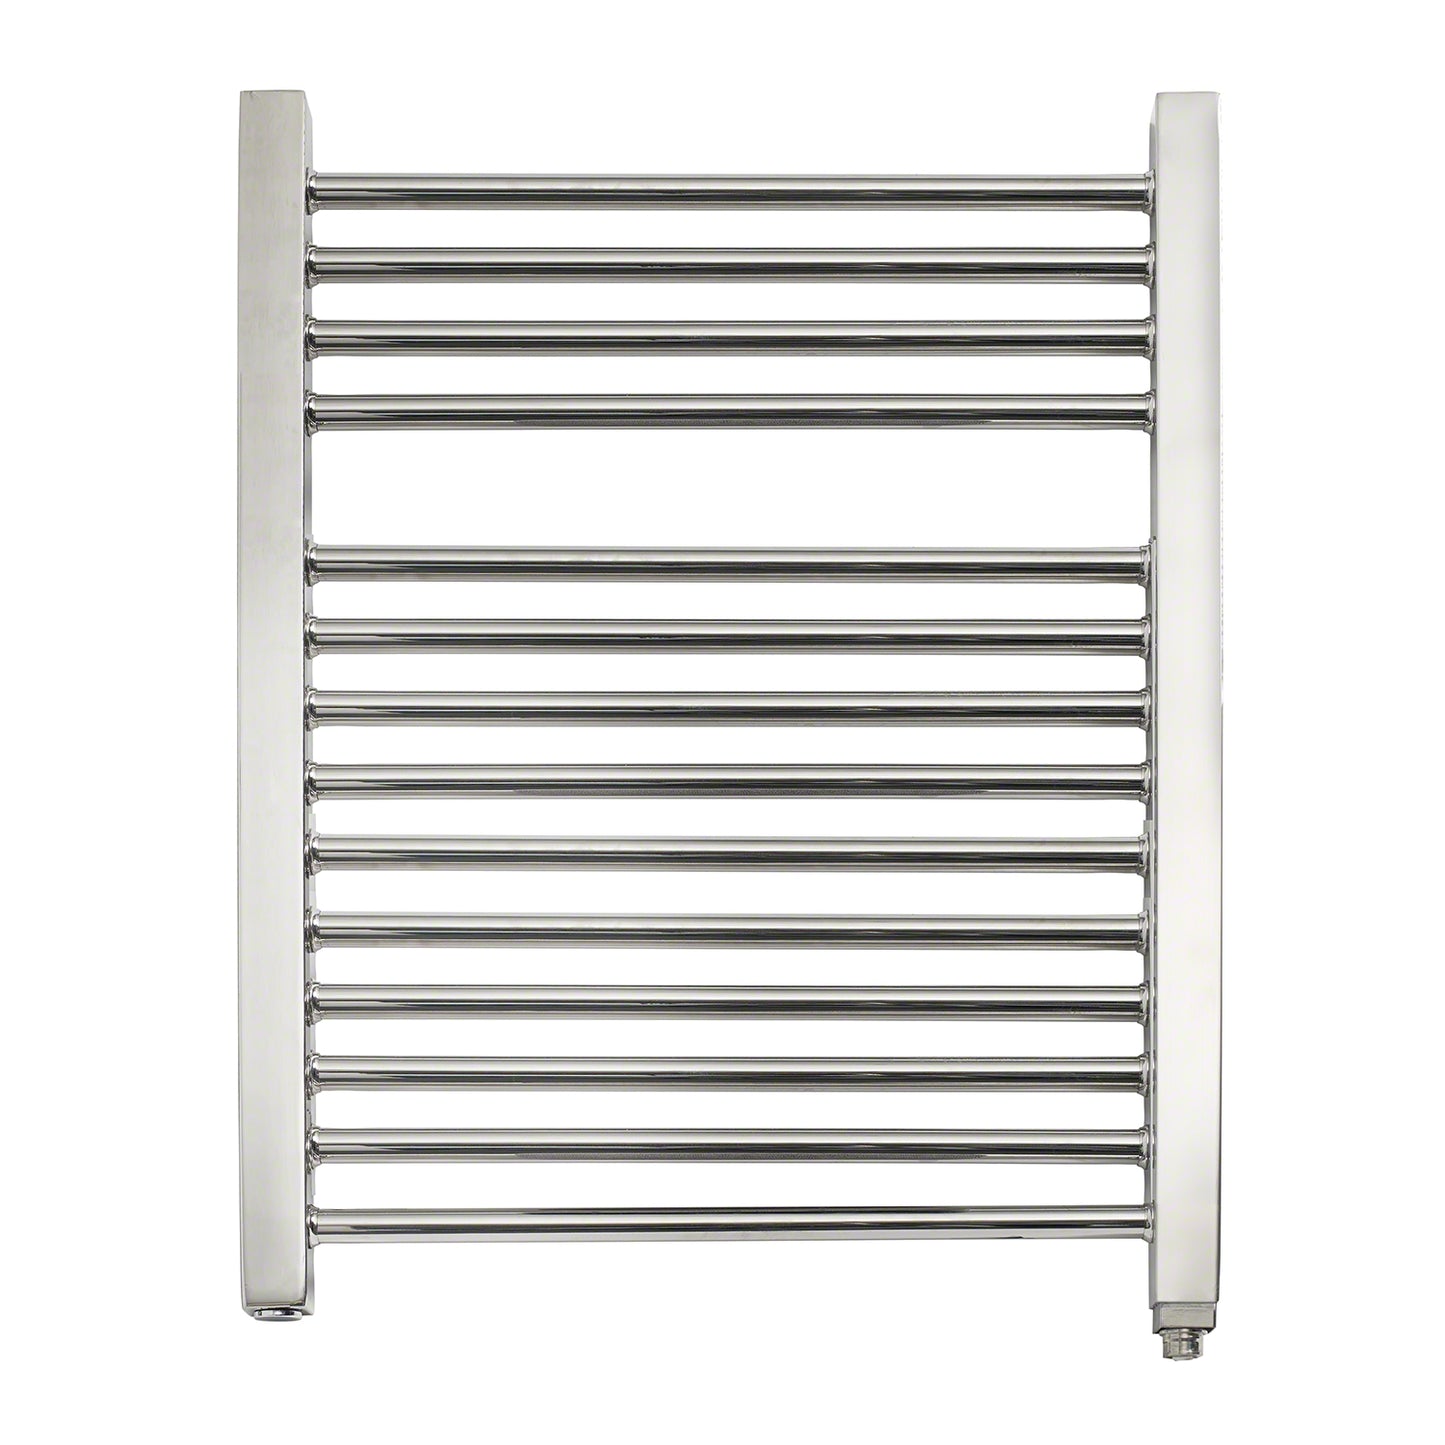 WX29 14-Bar Wall Mounted Electric Towel Warmer with Digital Timer in Stainless Steel Brushed